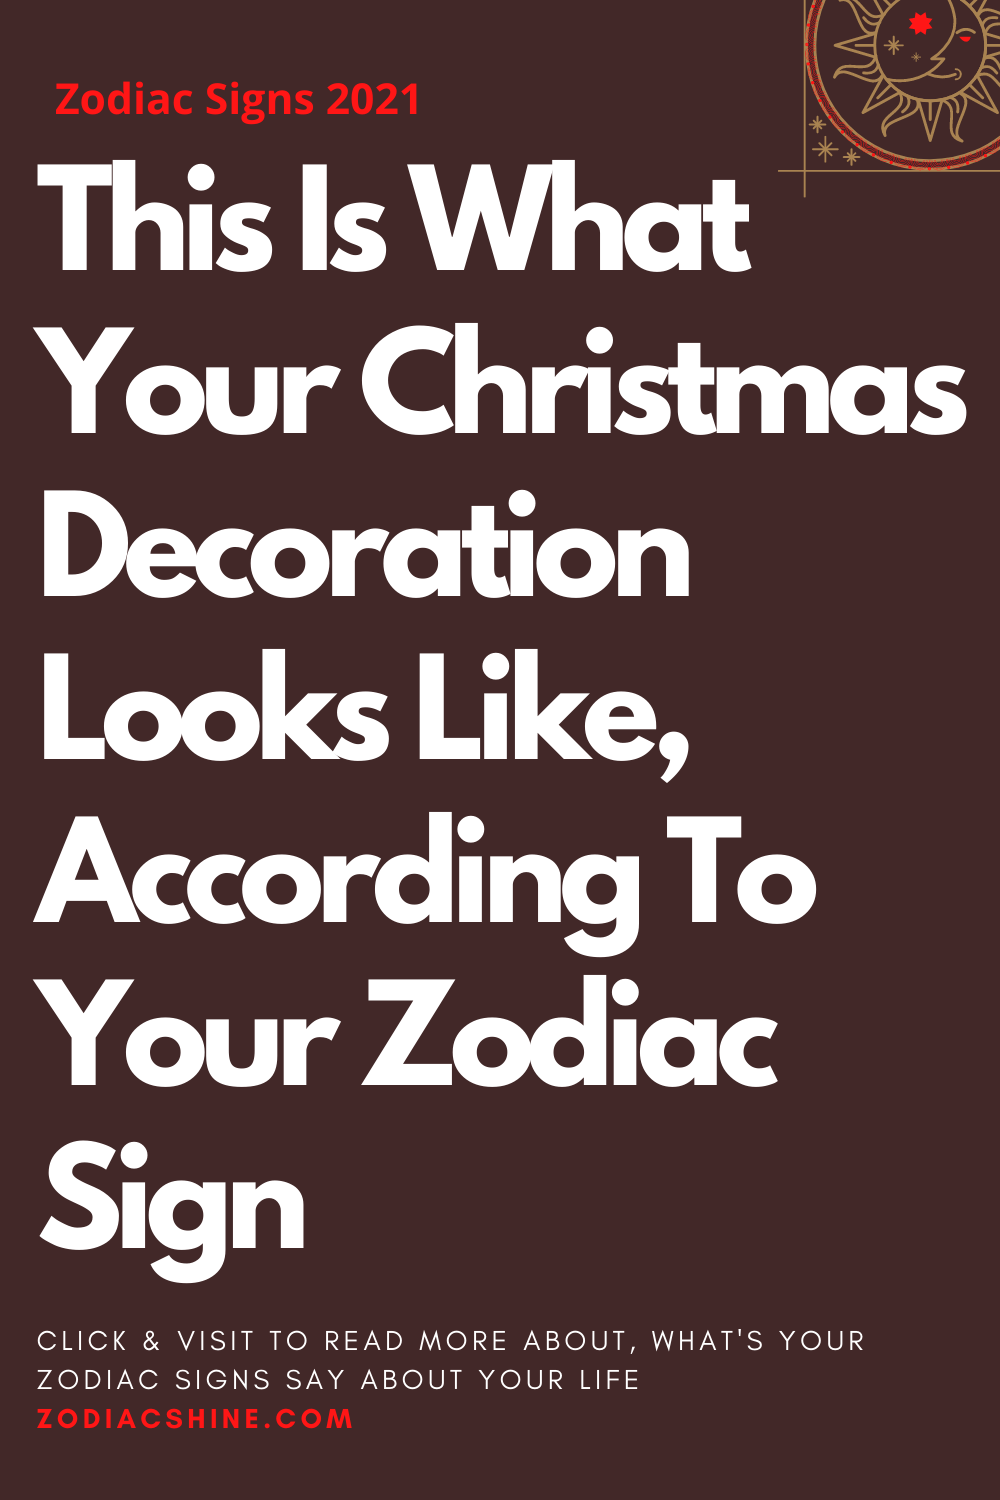 This Is What Your Christmas Decoration Looks Like According To Your Zodiac Sign